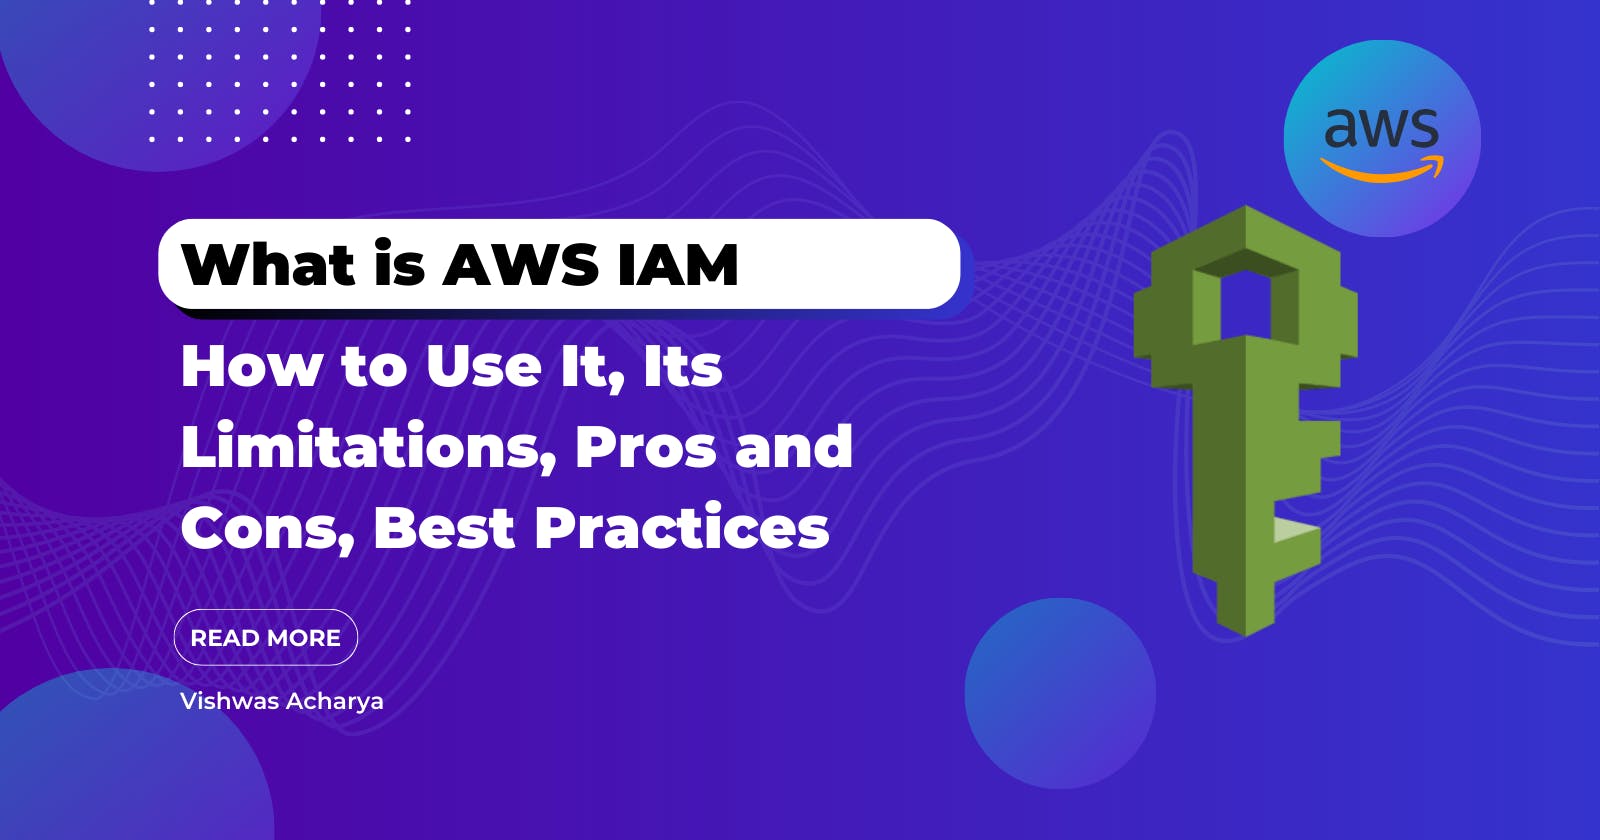 What is AWS IAM, How to Use It, Its Limitations, Pros and Cons, Best Practices